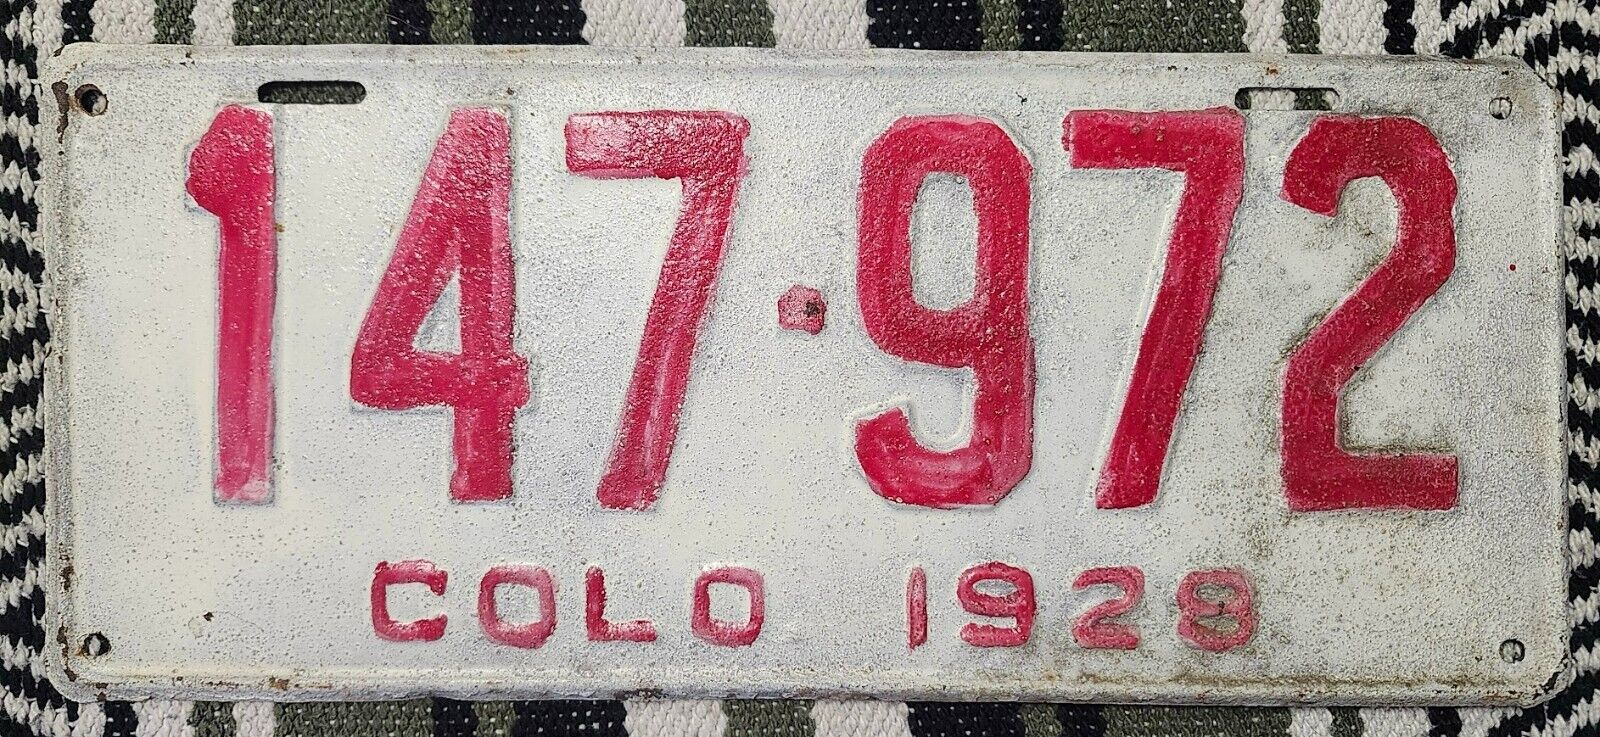 COLLECTABLE License Plates VINTAGE